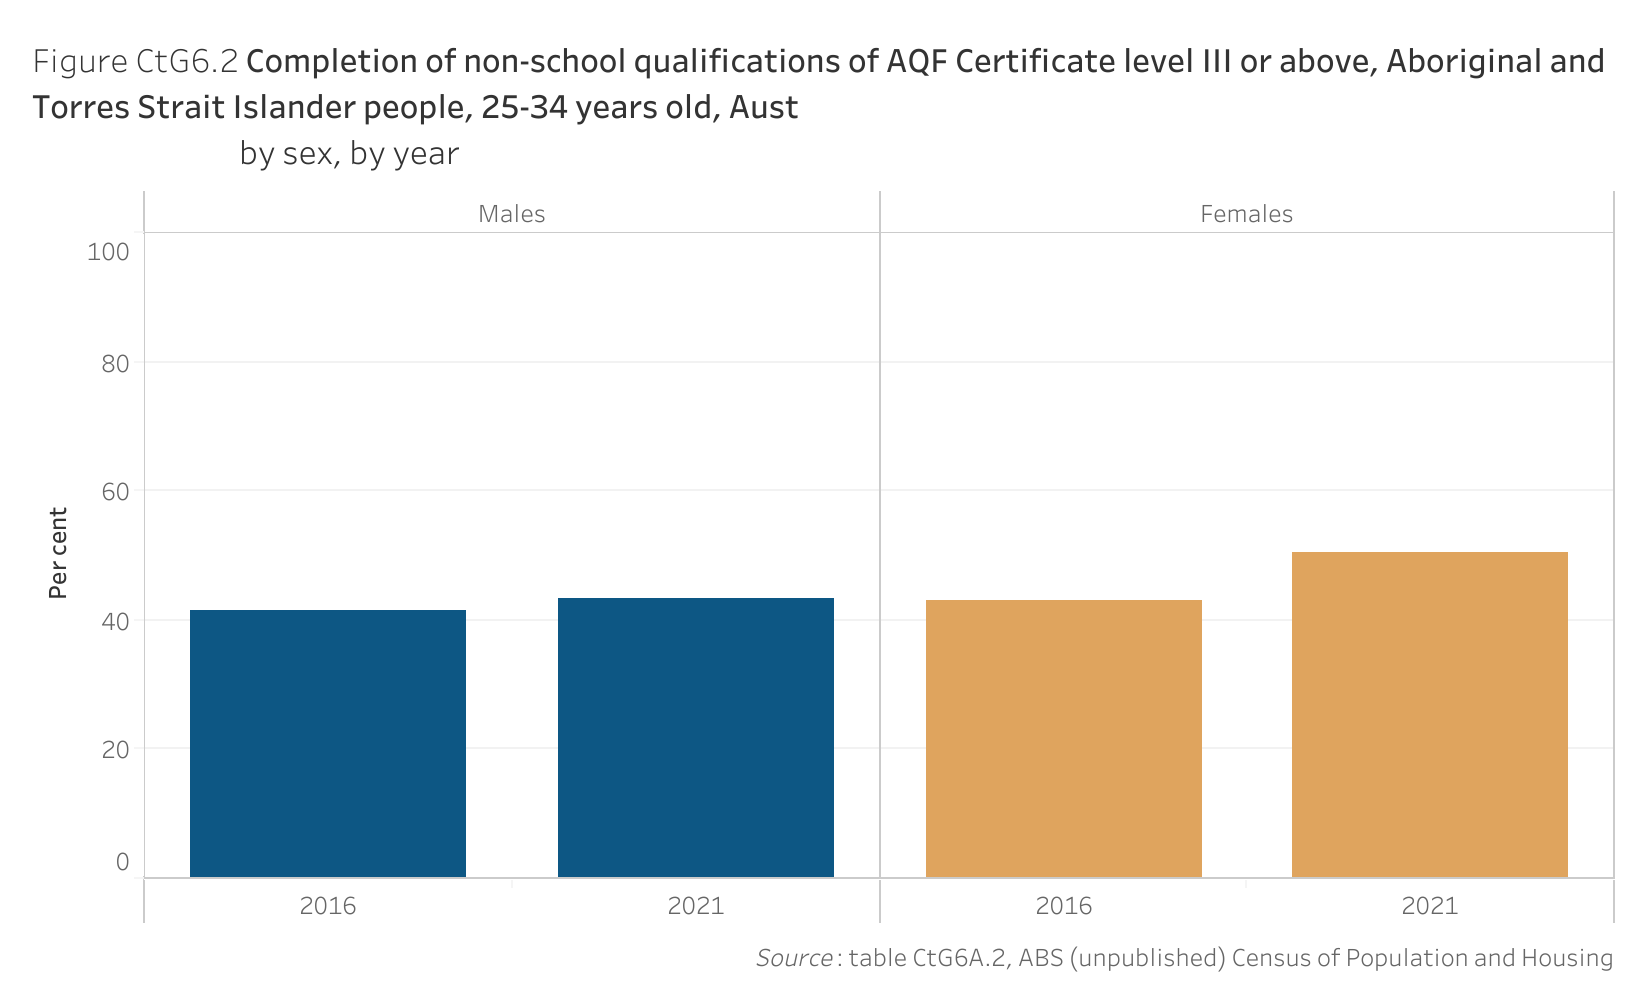 Figure CtG6.2 shows the completion of non-school qualifications of Australian Qualifications Framework Certificate level III or above, Aboriginal and Torres Strait Islander people, 25-34 years old, Australia, by sex, by year. More details can be found within the text near this image.